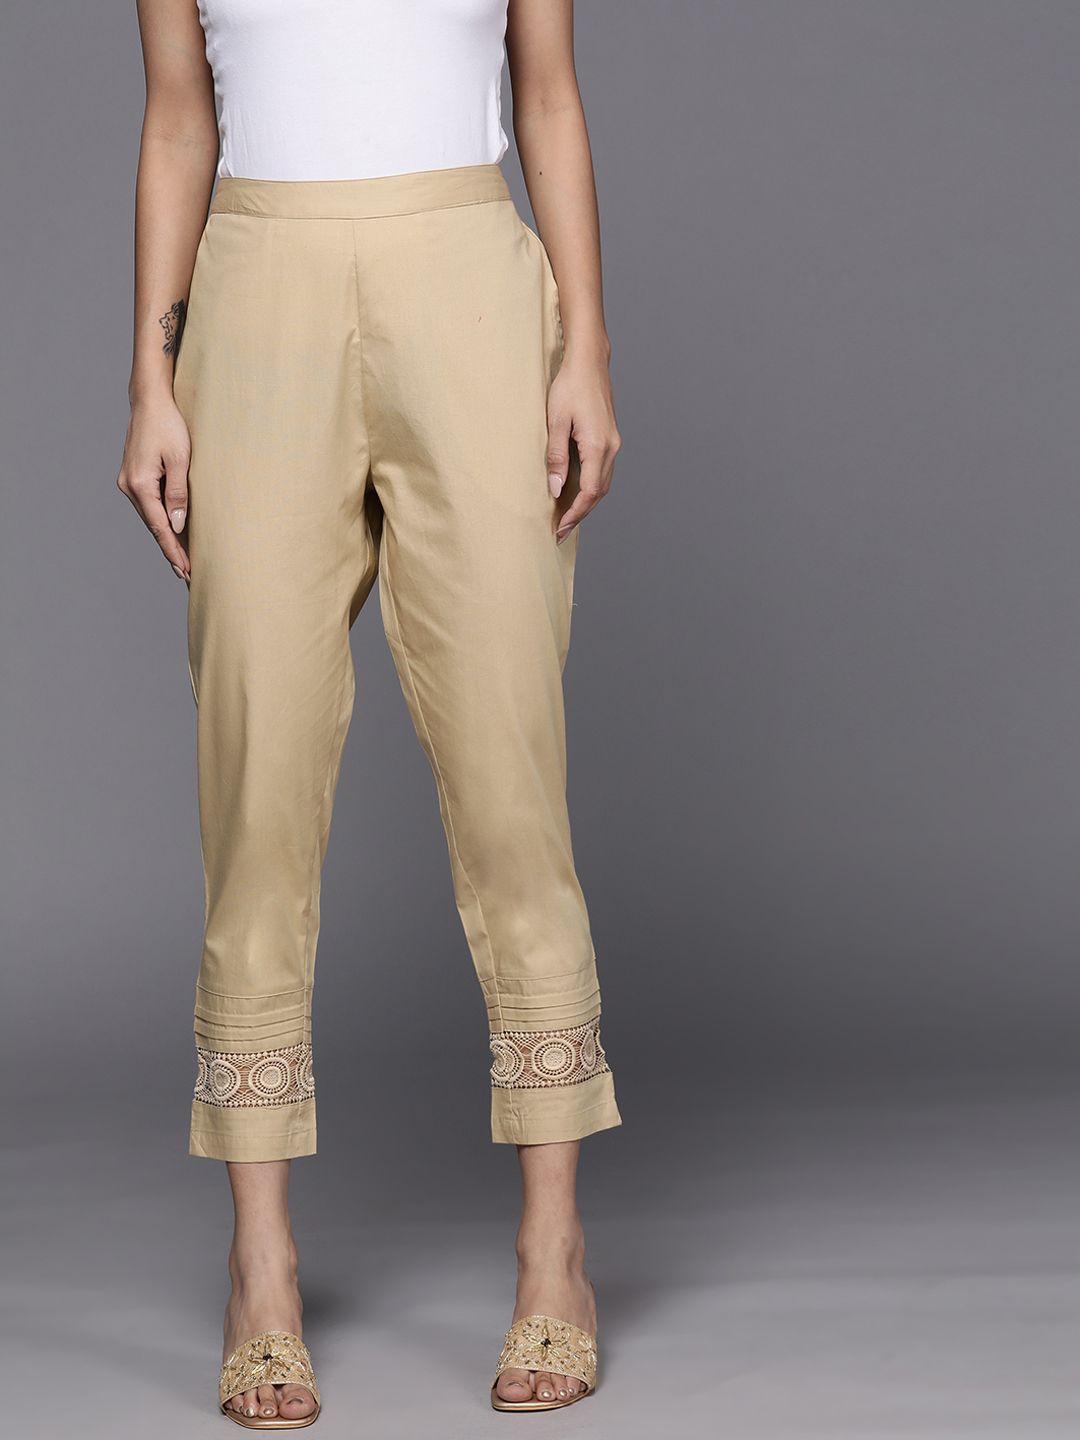 Libas Women Beige Pure Cotton Trousers with Designed Hem Price in India